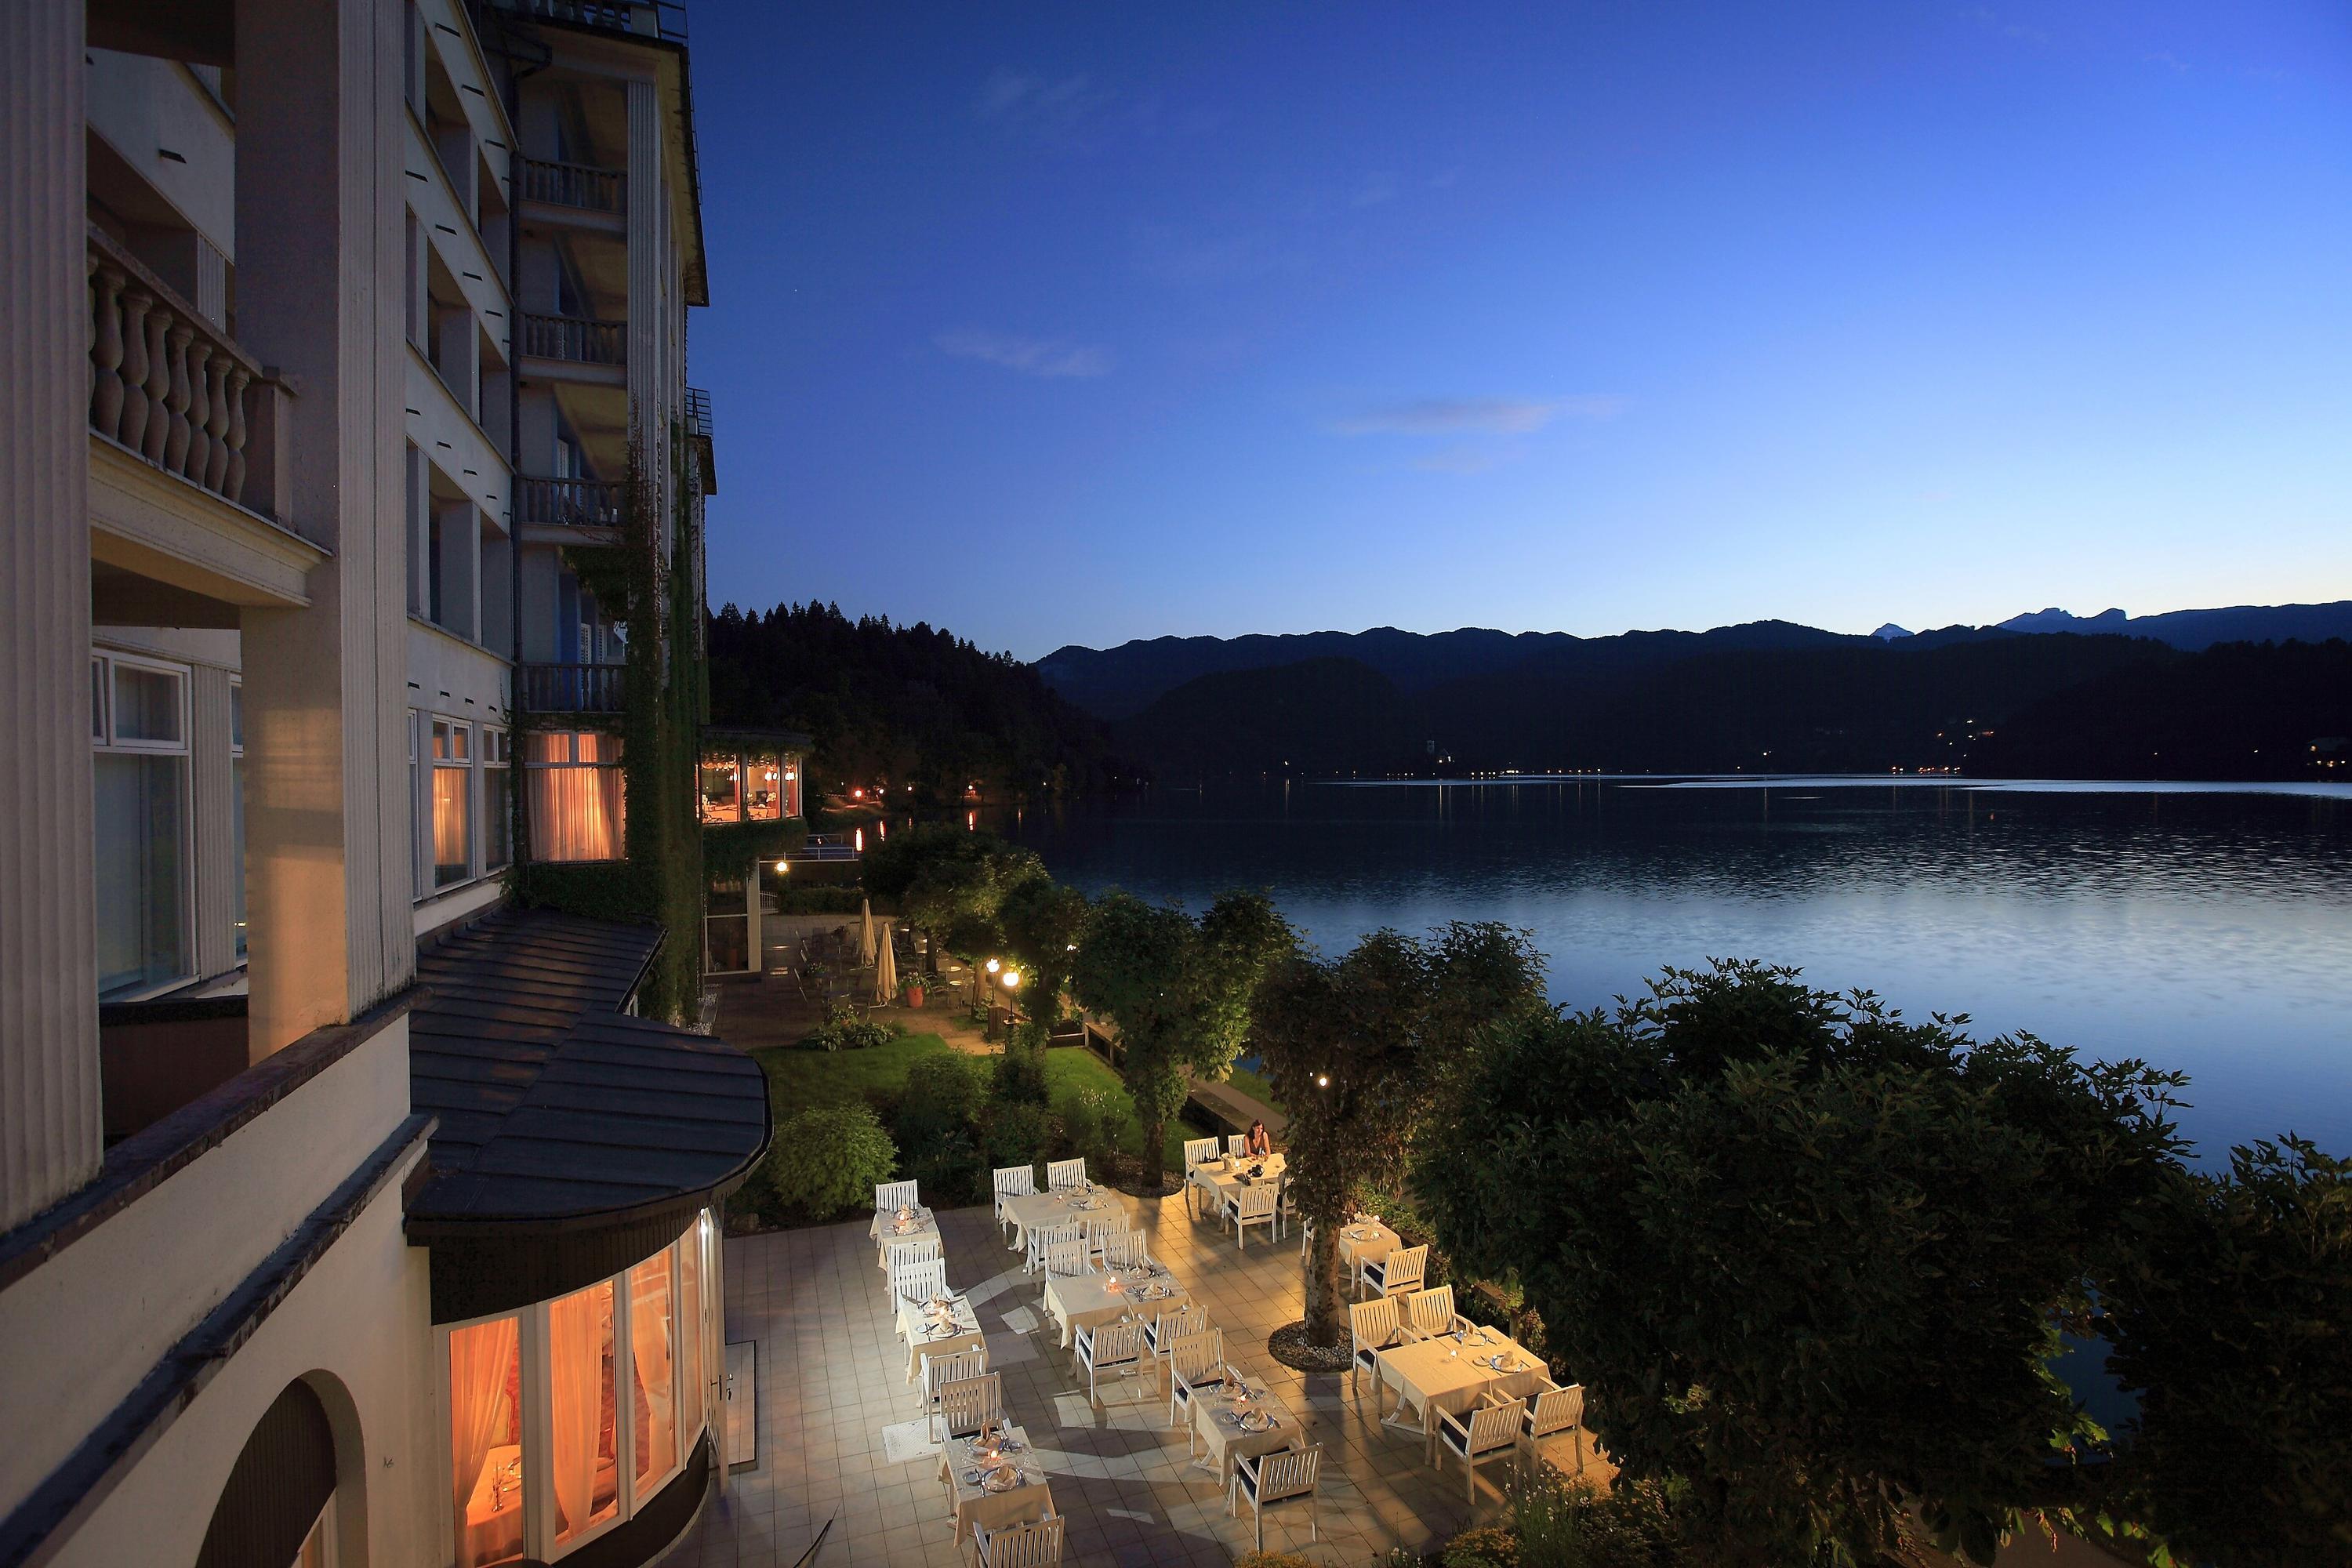 Grand Hotel Toplice - Small Luxury Hotels of the World, Bled